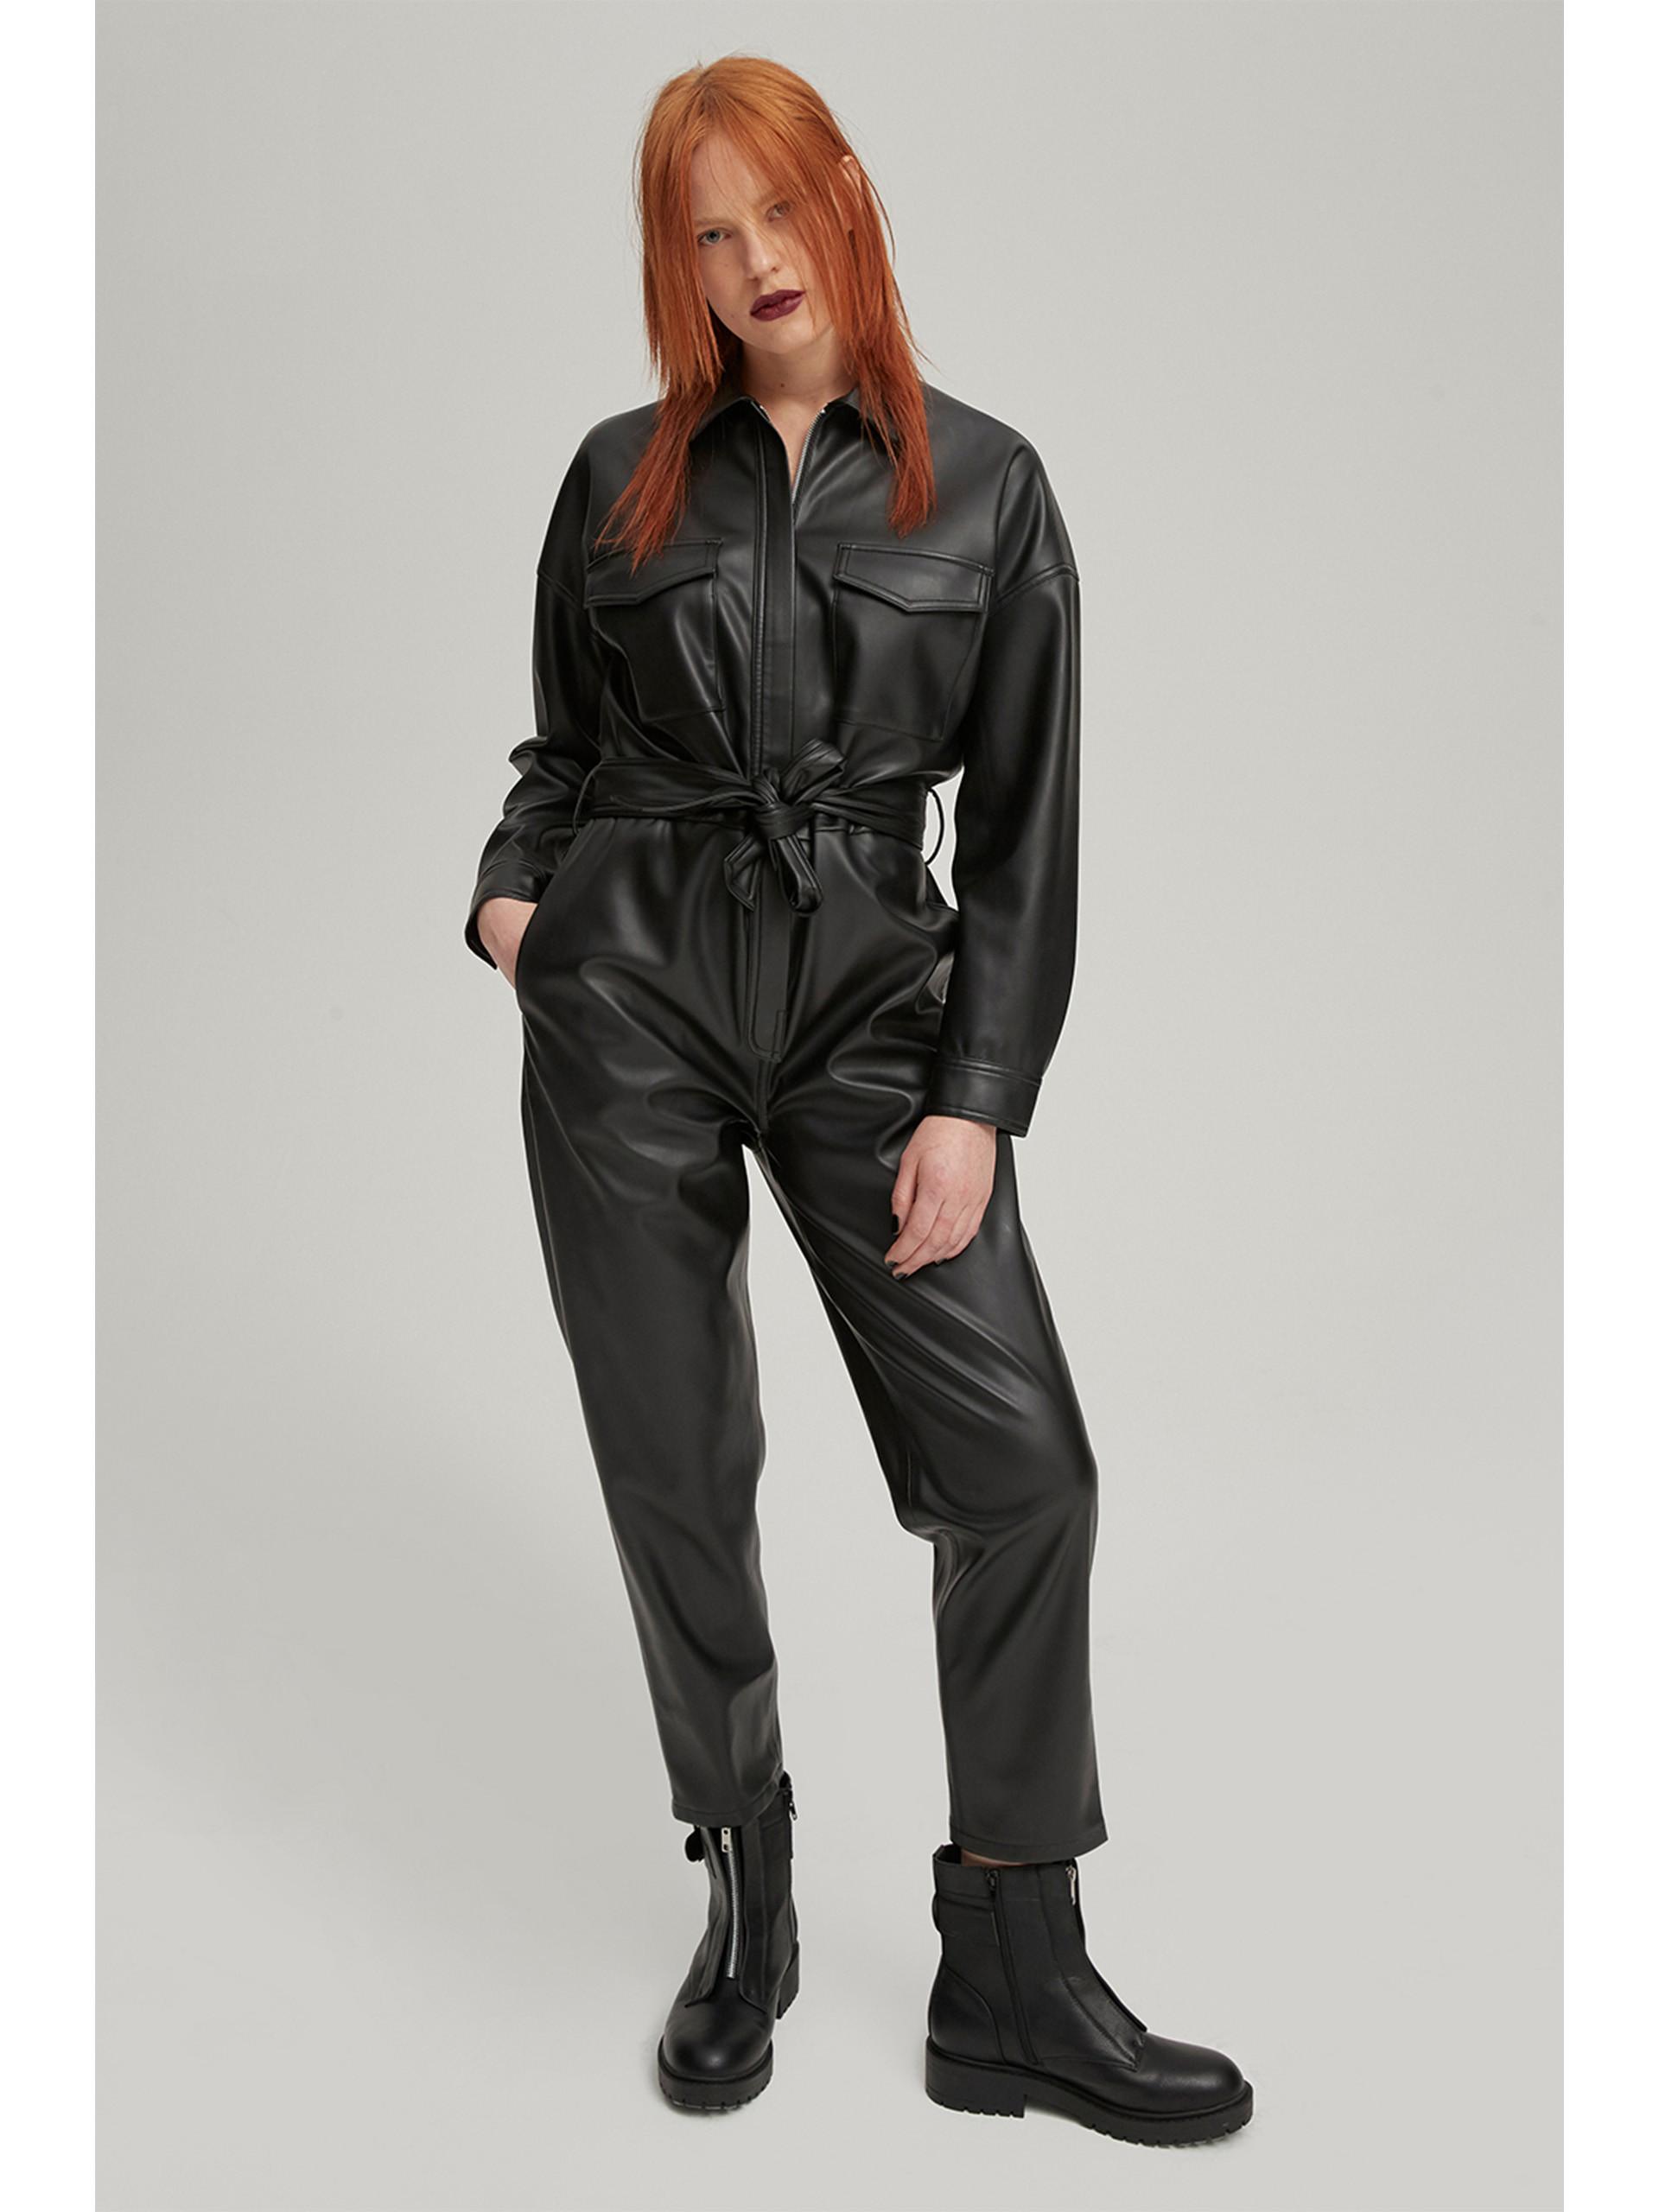 woman in utility jumpsuit